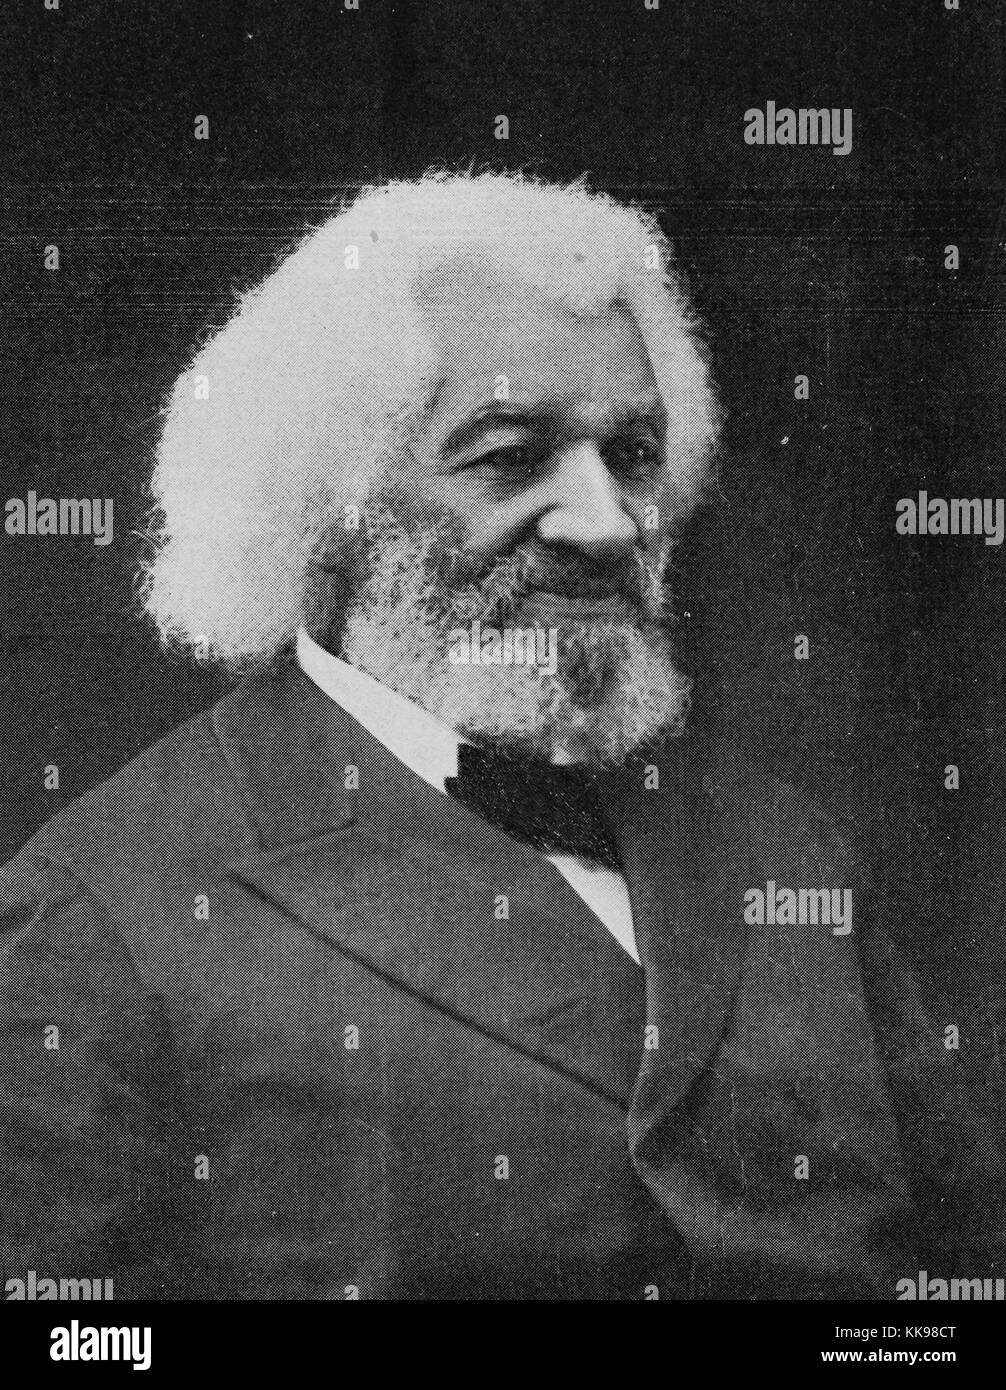 Black and white studio portrait of Frederick Douglass, an African-American social reformer, abolitionist, orator, writer, and statesman, 1902. From the New York Public Library. Stock Photo